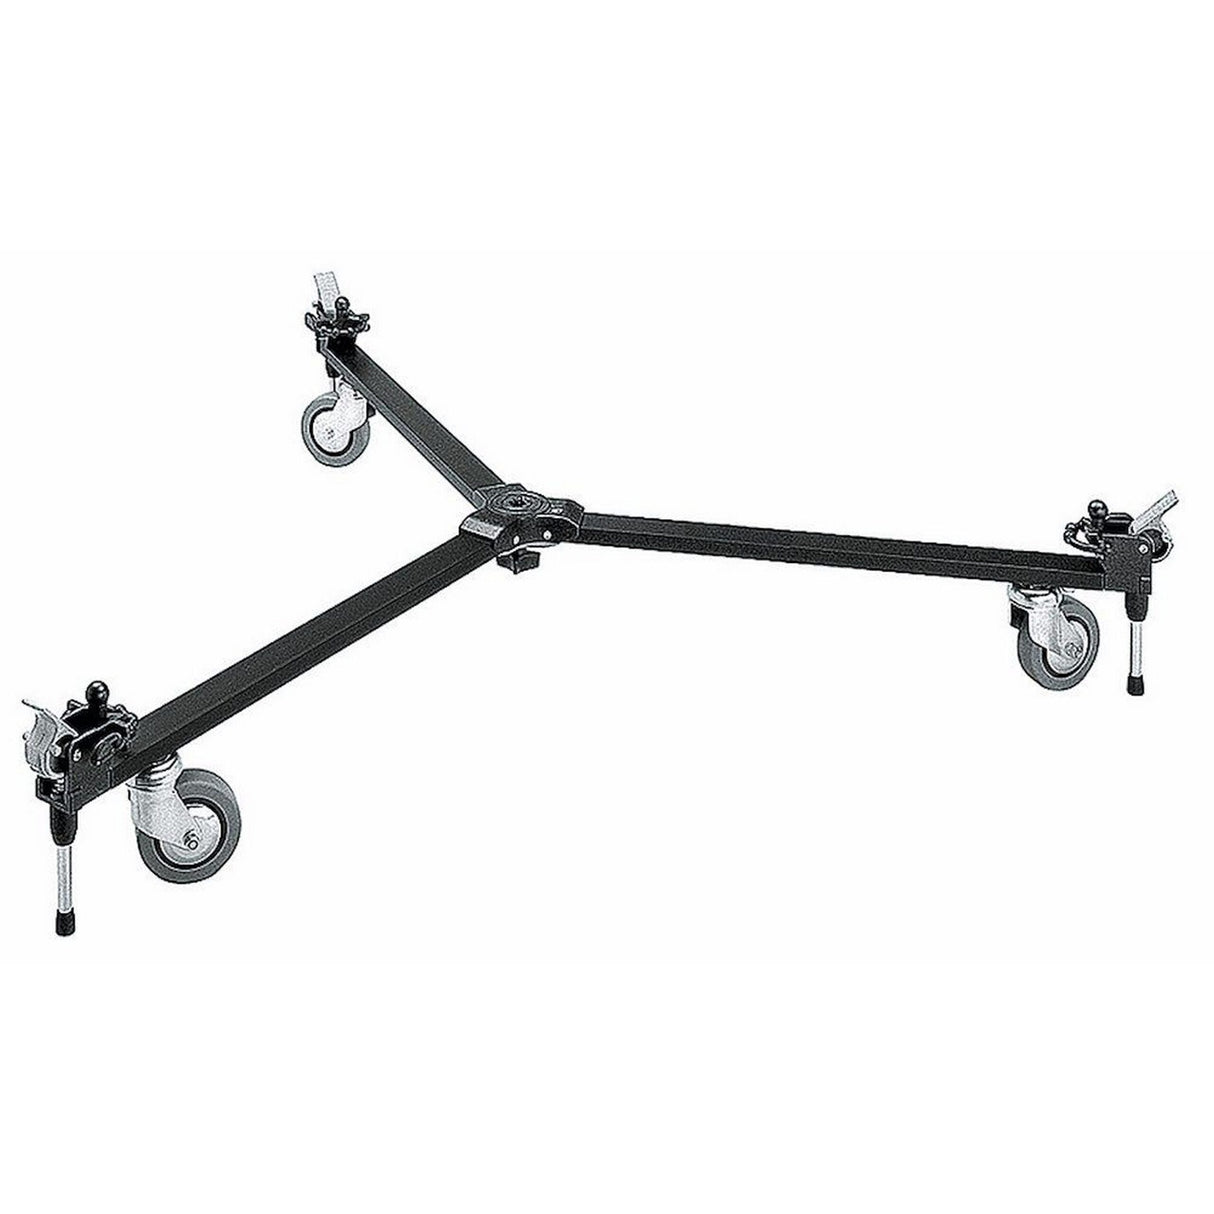 Manfrotto 127 Basic Dolly with Wheel Lock System for Light/Medium Tripods